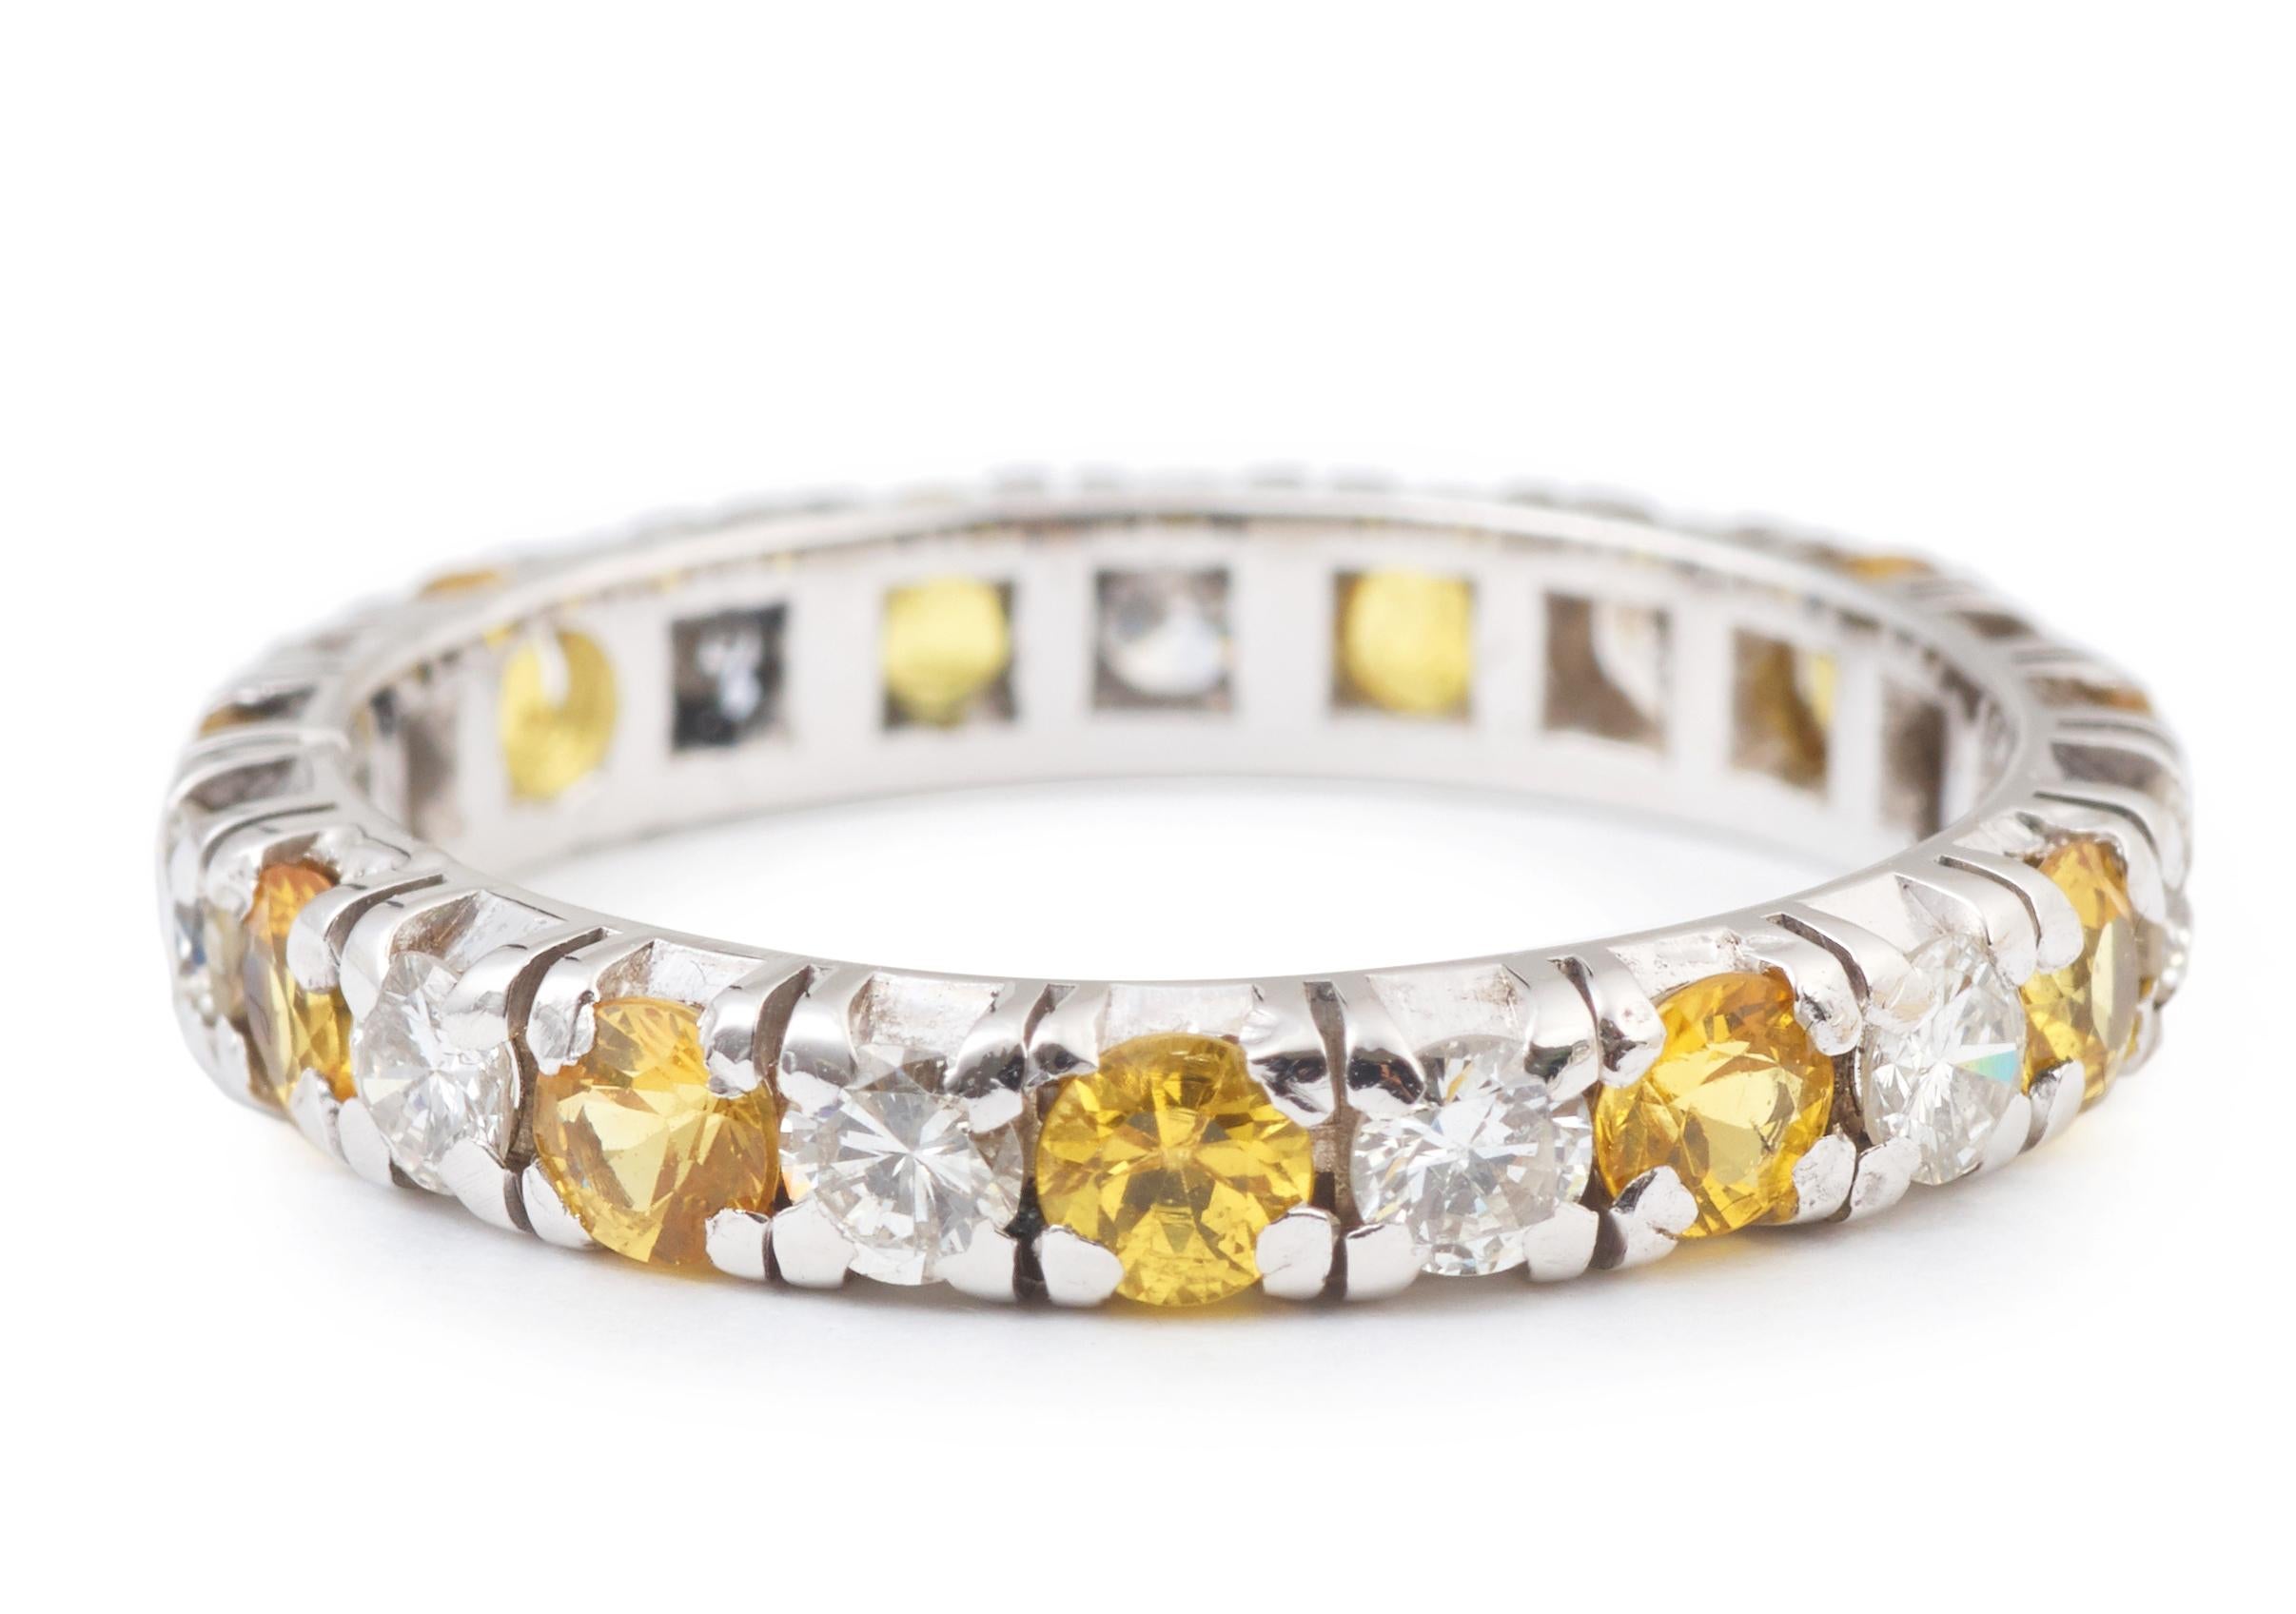 Ring set with 11 round cut yellow sapphires and 11 brillant cut diamonds.

Weight od the diamonds : approx 0.33 cts 

Weight of the sapphires : approx 0.44 cts 

18 carats white gold, 750/000th

Size of the ring : 52 fr (6 us)

Dimensions of the